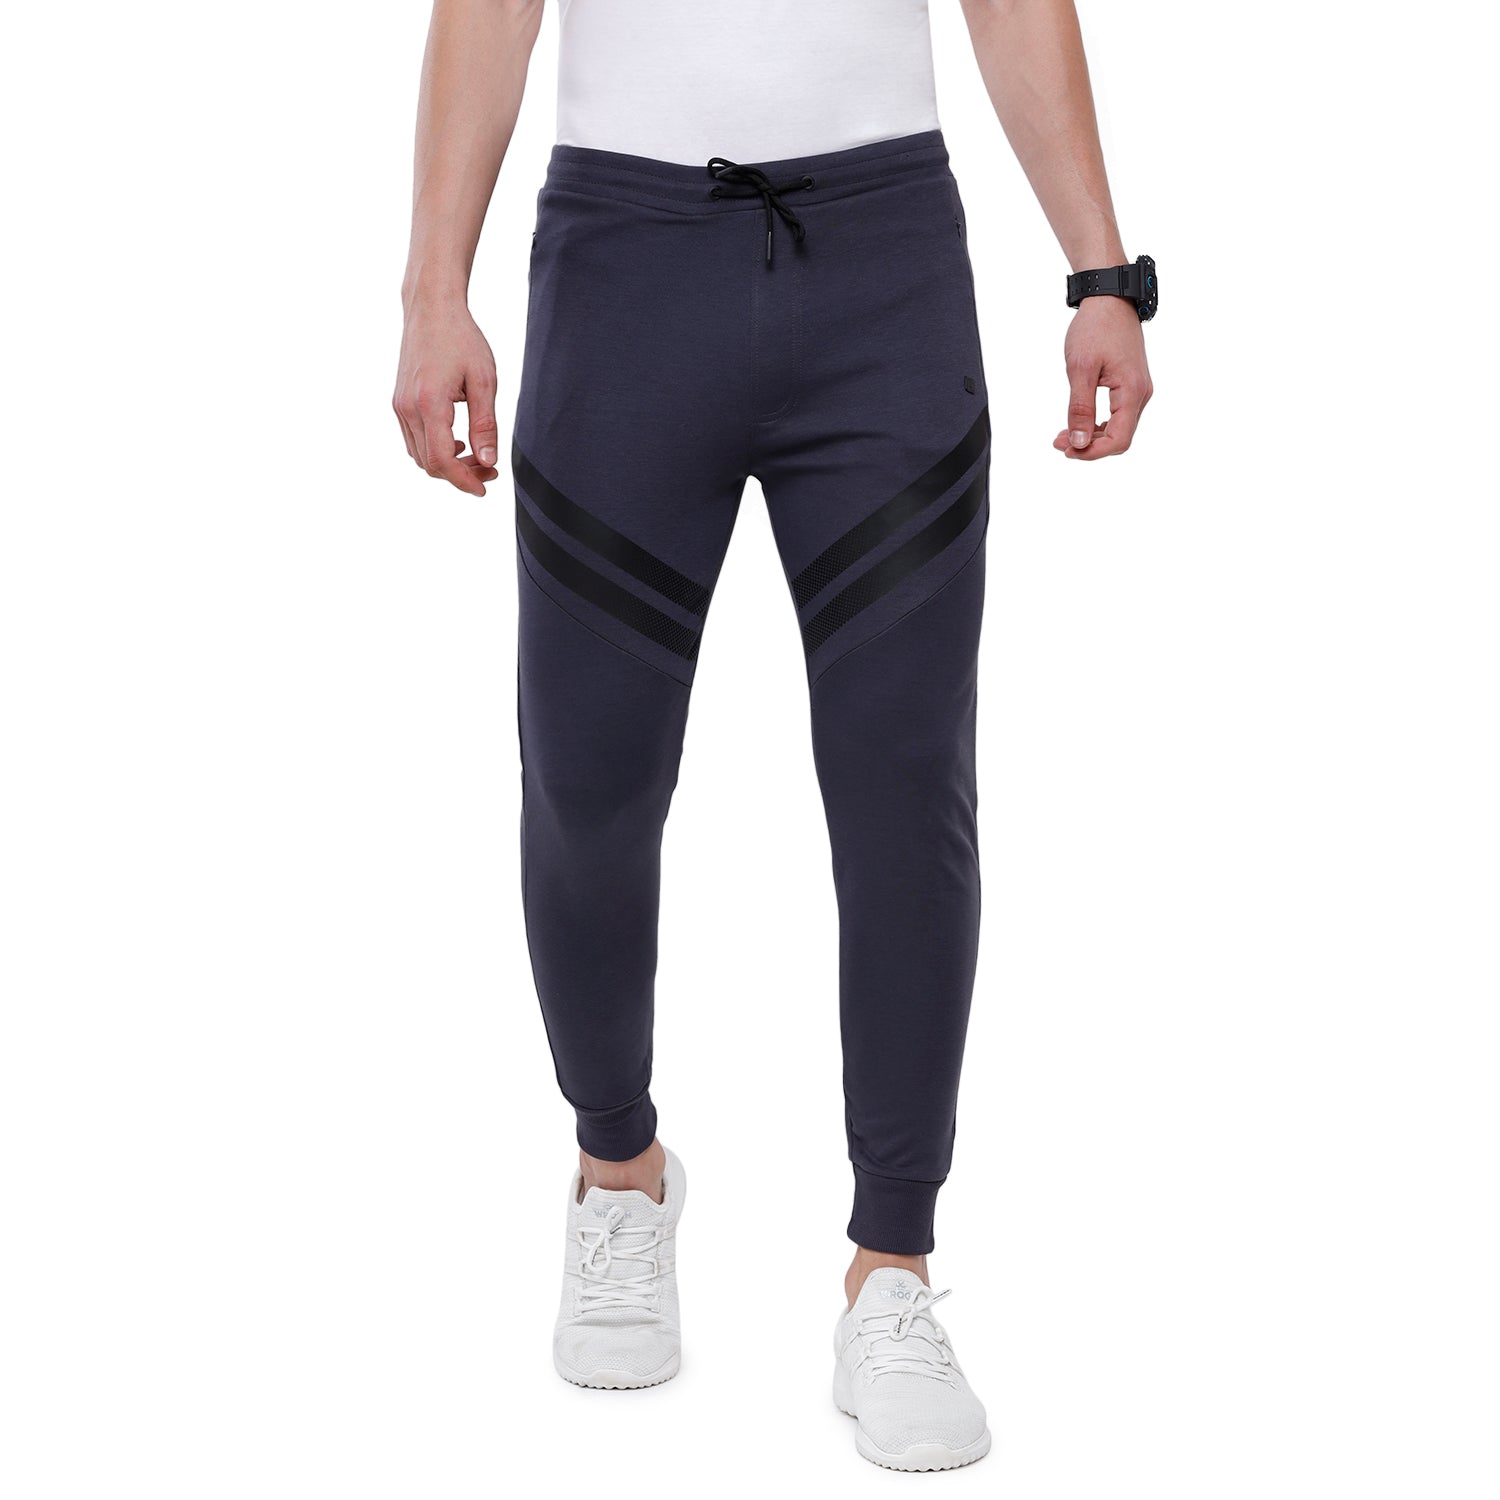 U S Polo Assn Navy Track Pants for Men #I632 at Rs 899.00